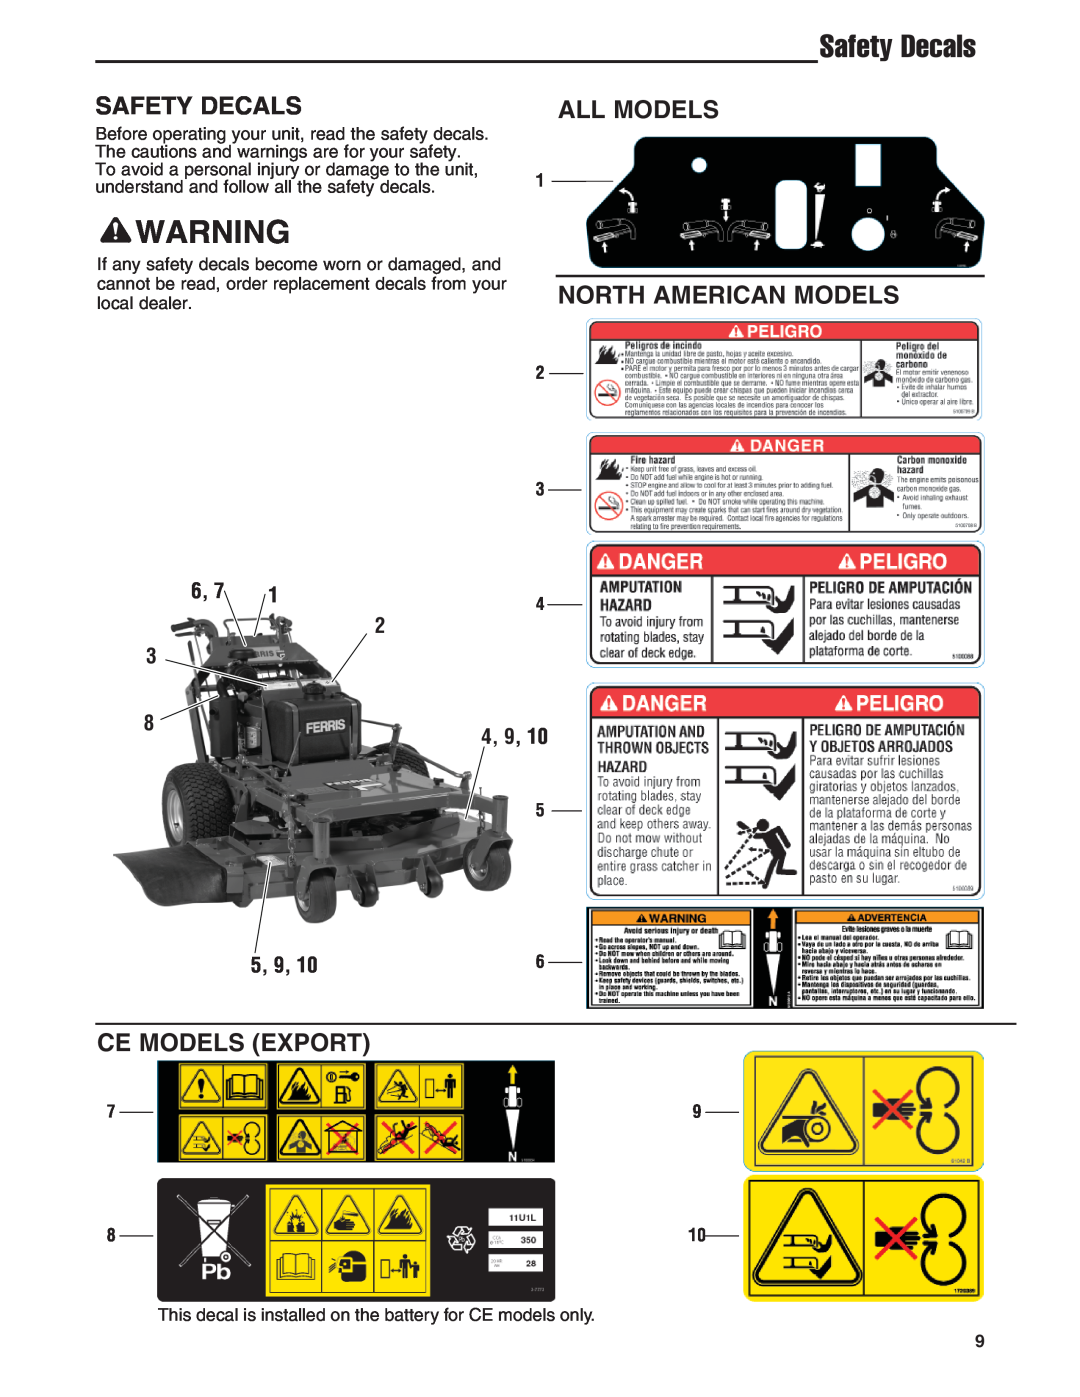 Ferris Industries 5900636, 5900645, 5900646, 5900638 manual Safety Decals, All Models, North American Models, Ce Models Export 